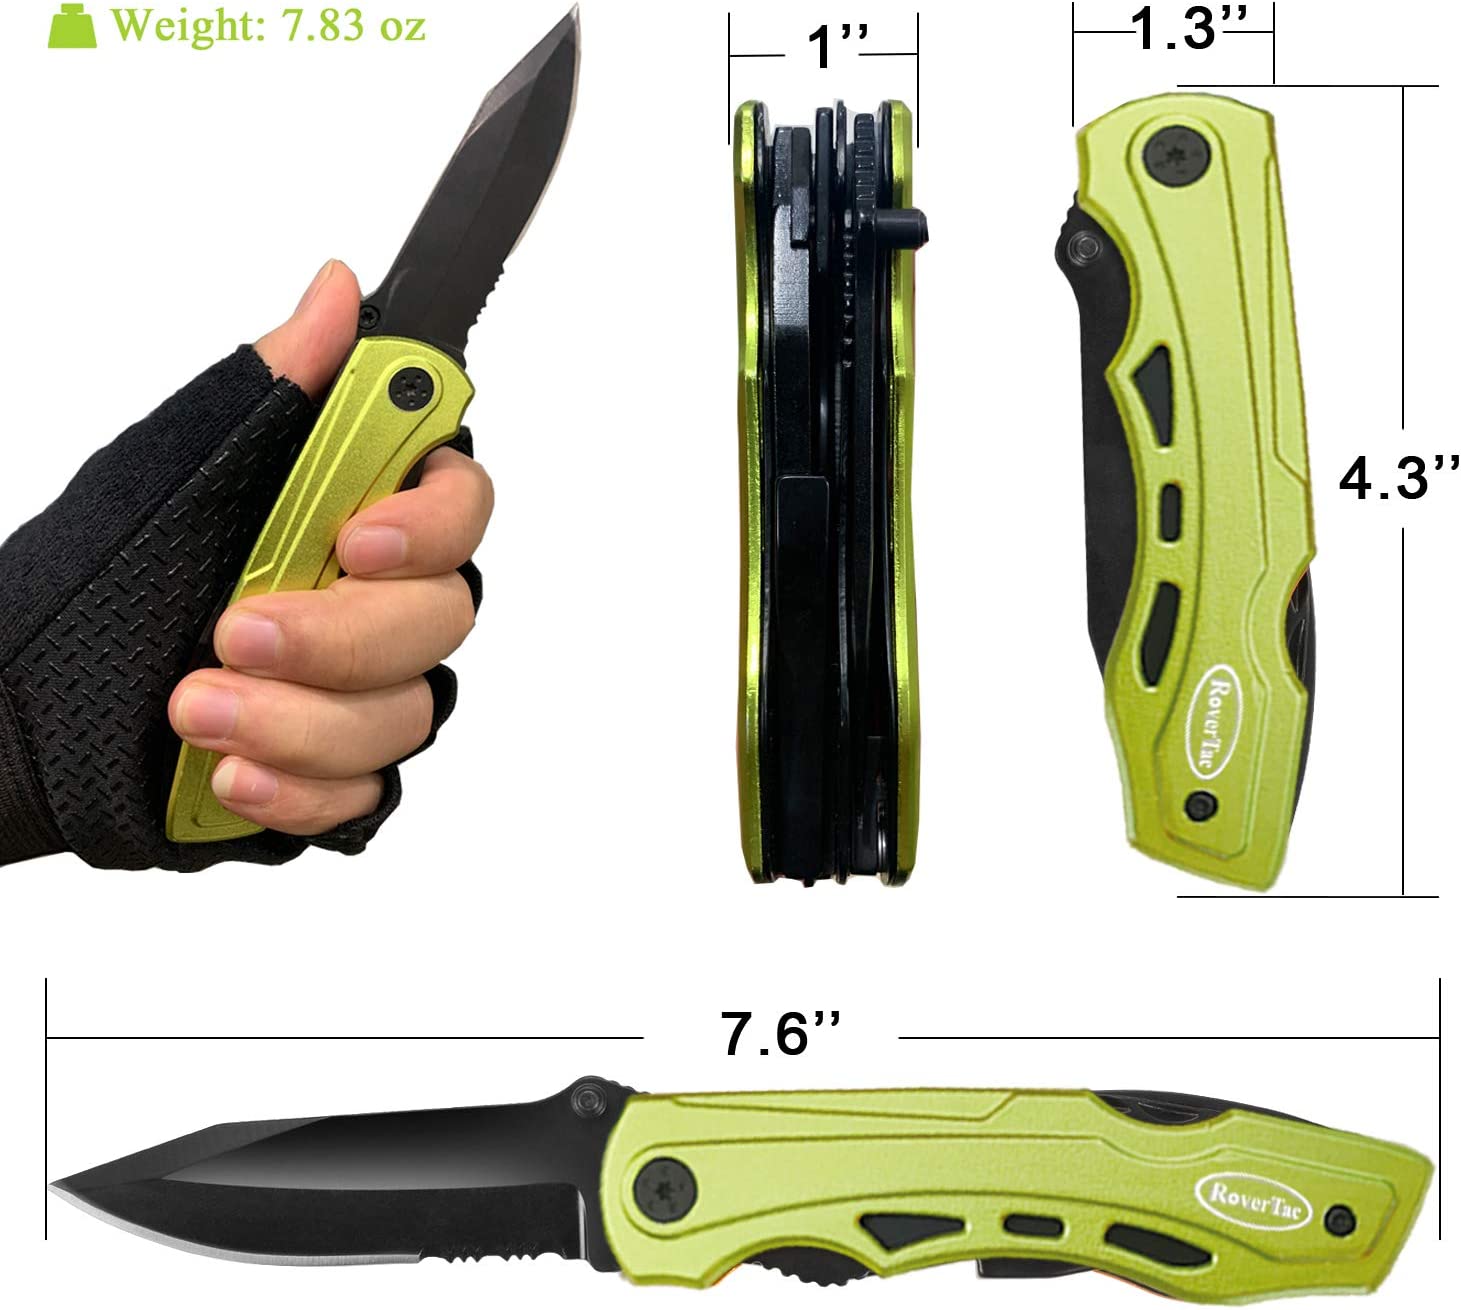 RoverTac Pocket Multitool Knife for Men's Gifts, Gifts for Men Him Husband Boyfriend, Men's Gifts for Birthday Christmas Father's Day, Stocking Stuffers for Men, Cool Tools Gadgets Gifts for Men